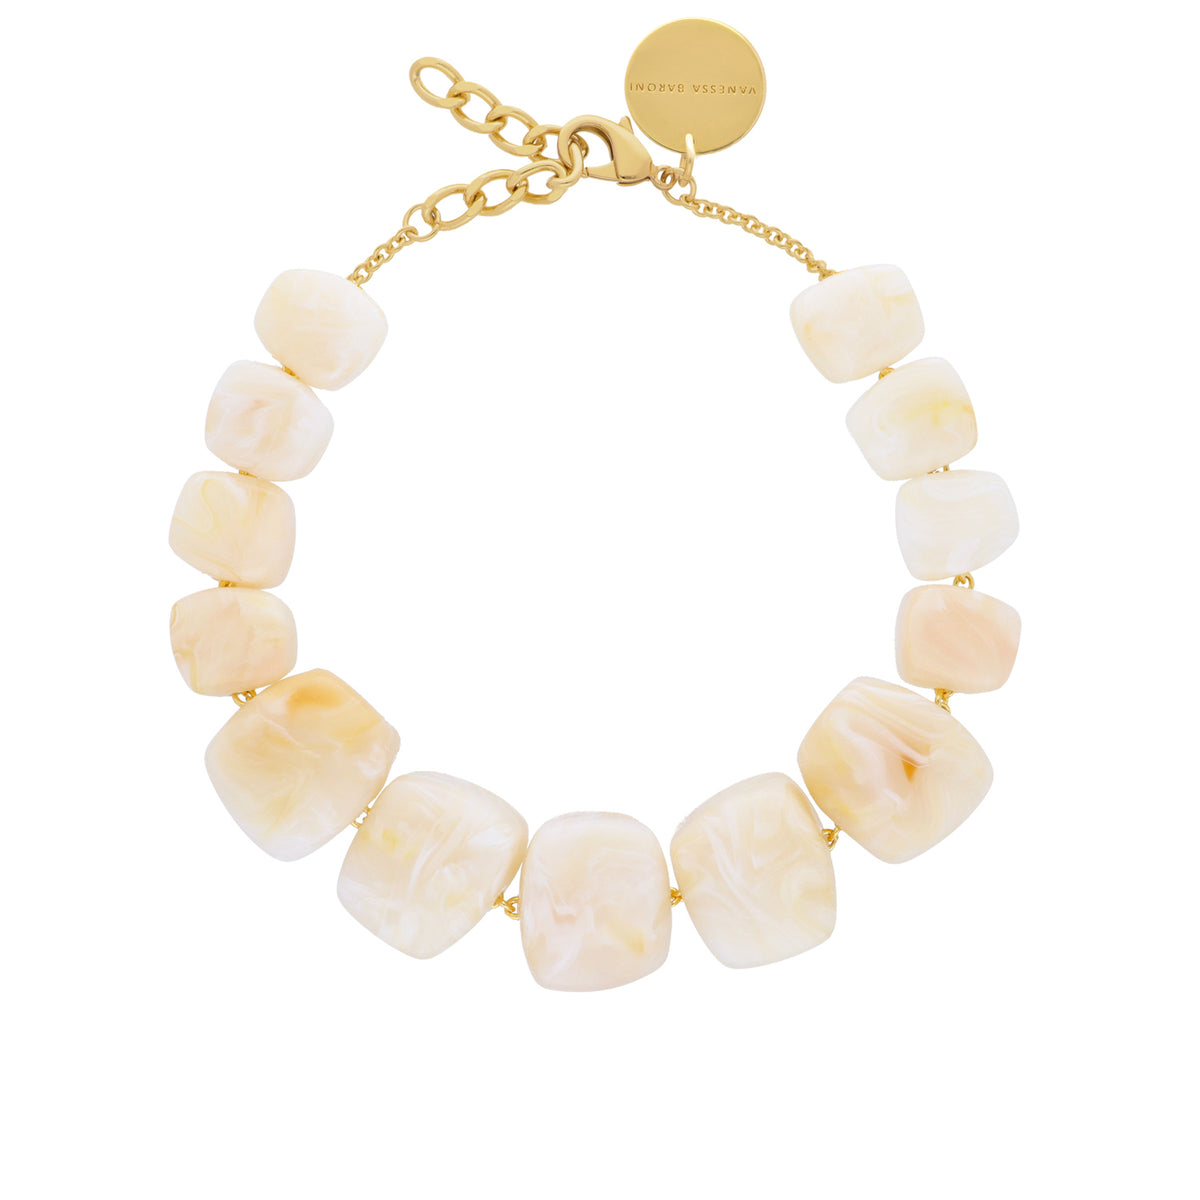 Big Organic Shaped Necklace Pearl Marble